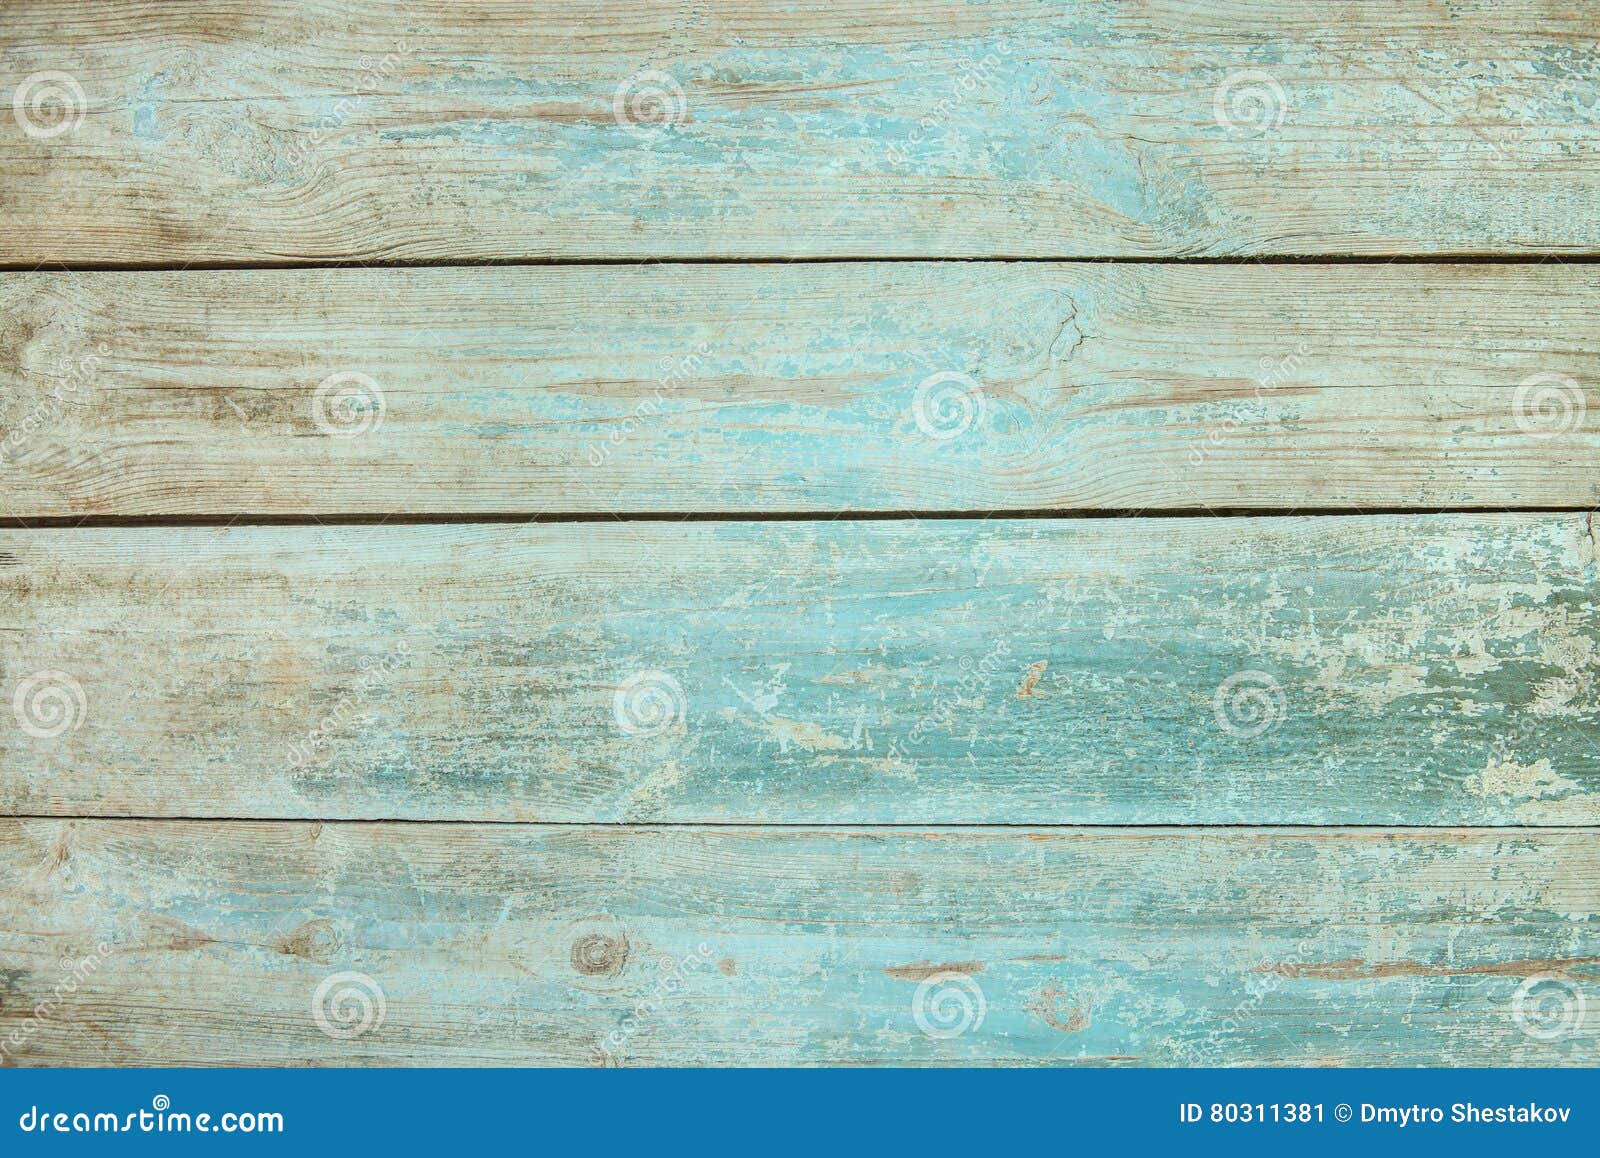 old weathered wood plank painted in blue